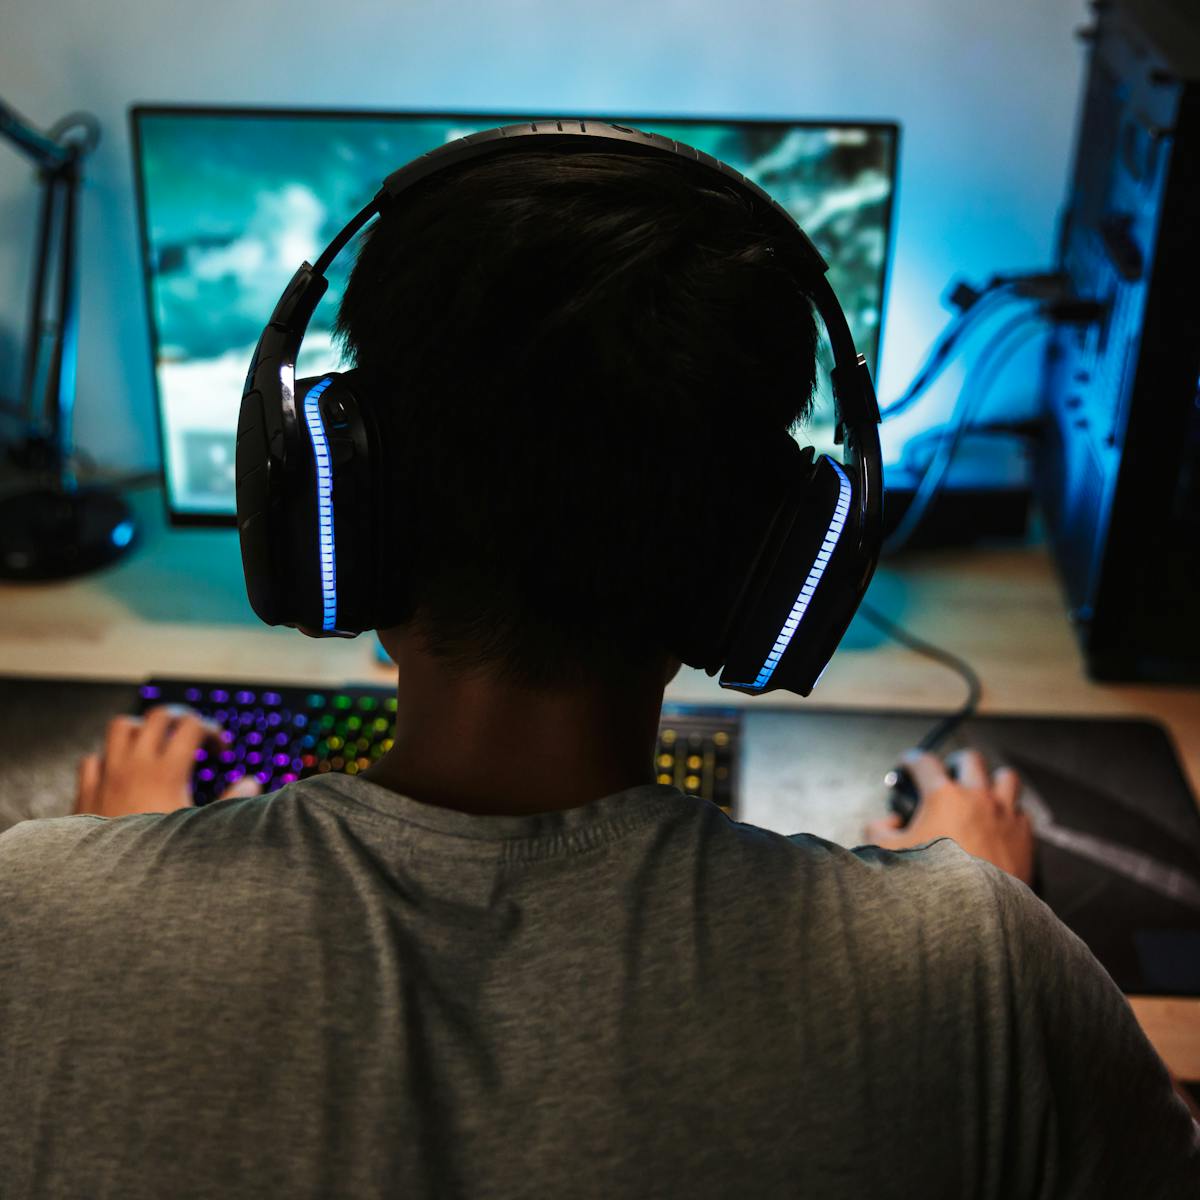 Playing video games can ease loneliness during the coronavirus pandemic